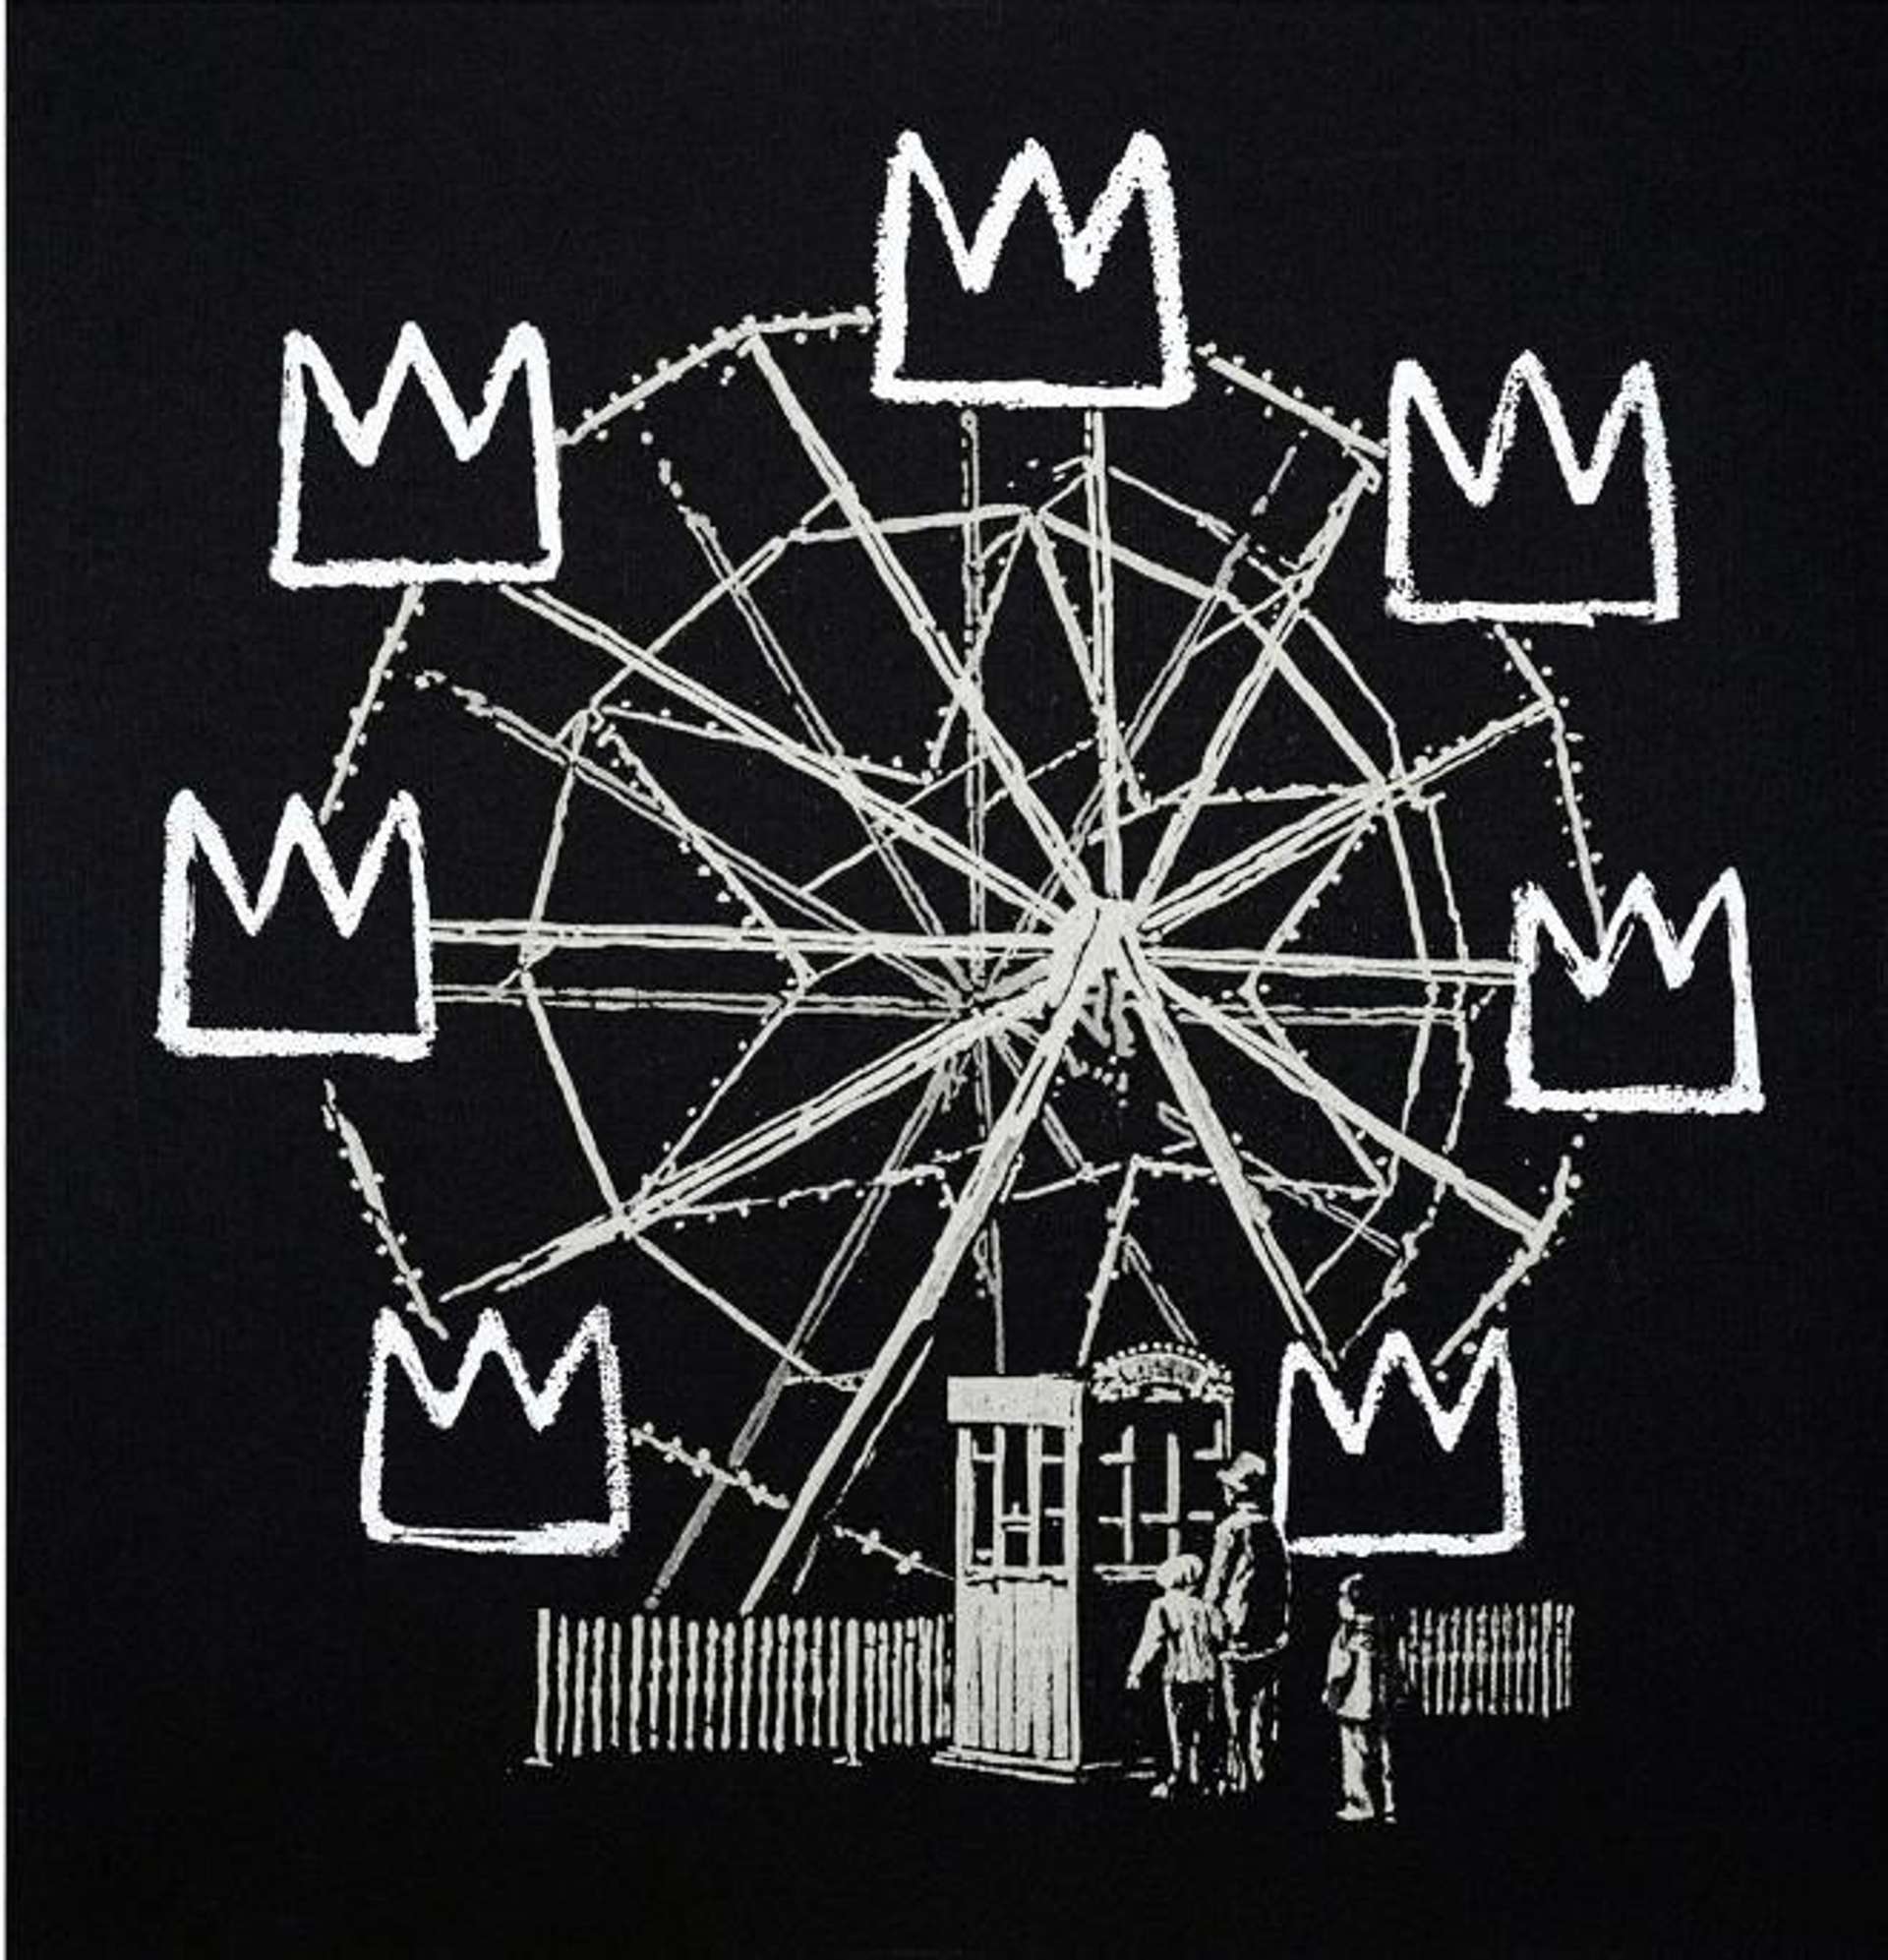 This print depicts a ferris wheel, with crowns replacing carts in homage to Jean-Michel Basquiat, commenting on both capitalism's appropriation of art and the referencing that underscores Banksy’s own street art.